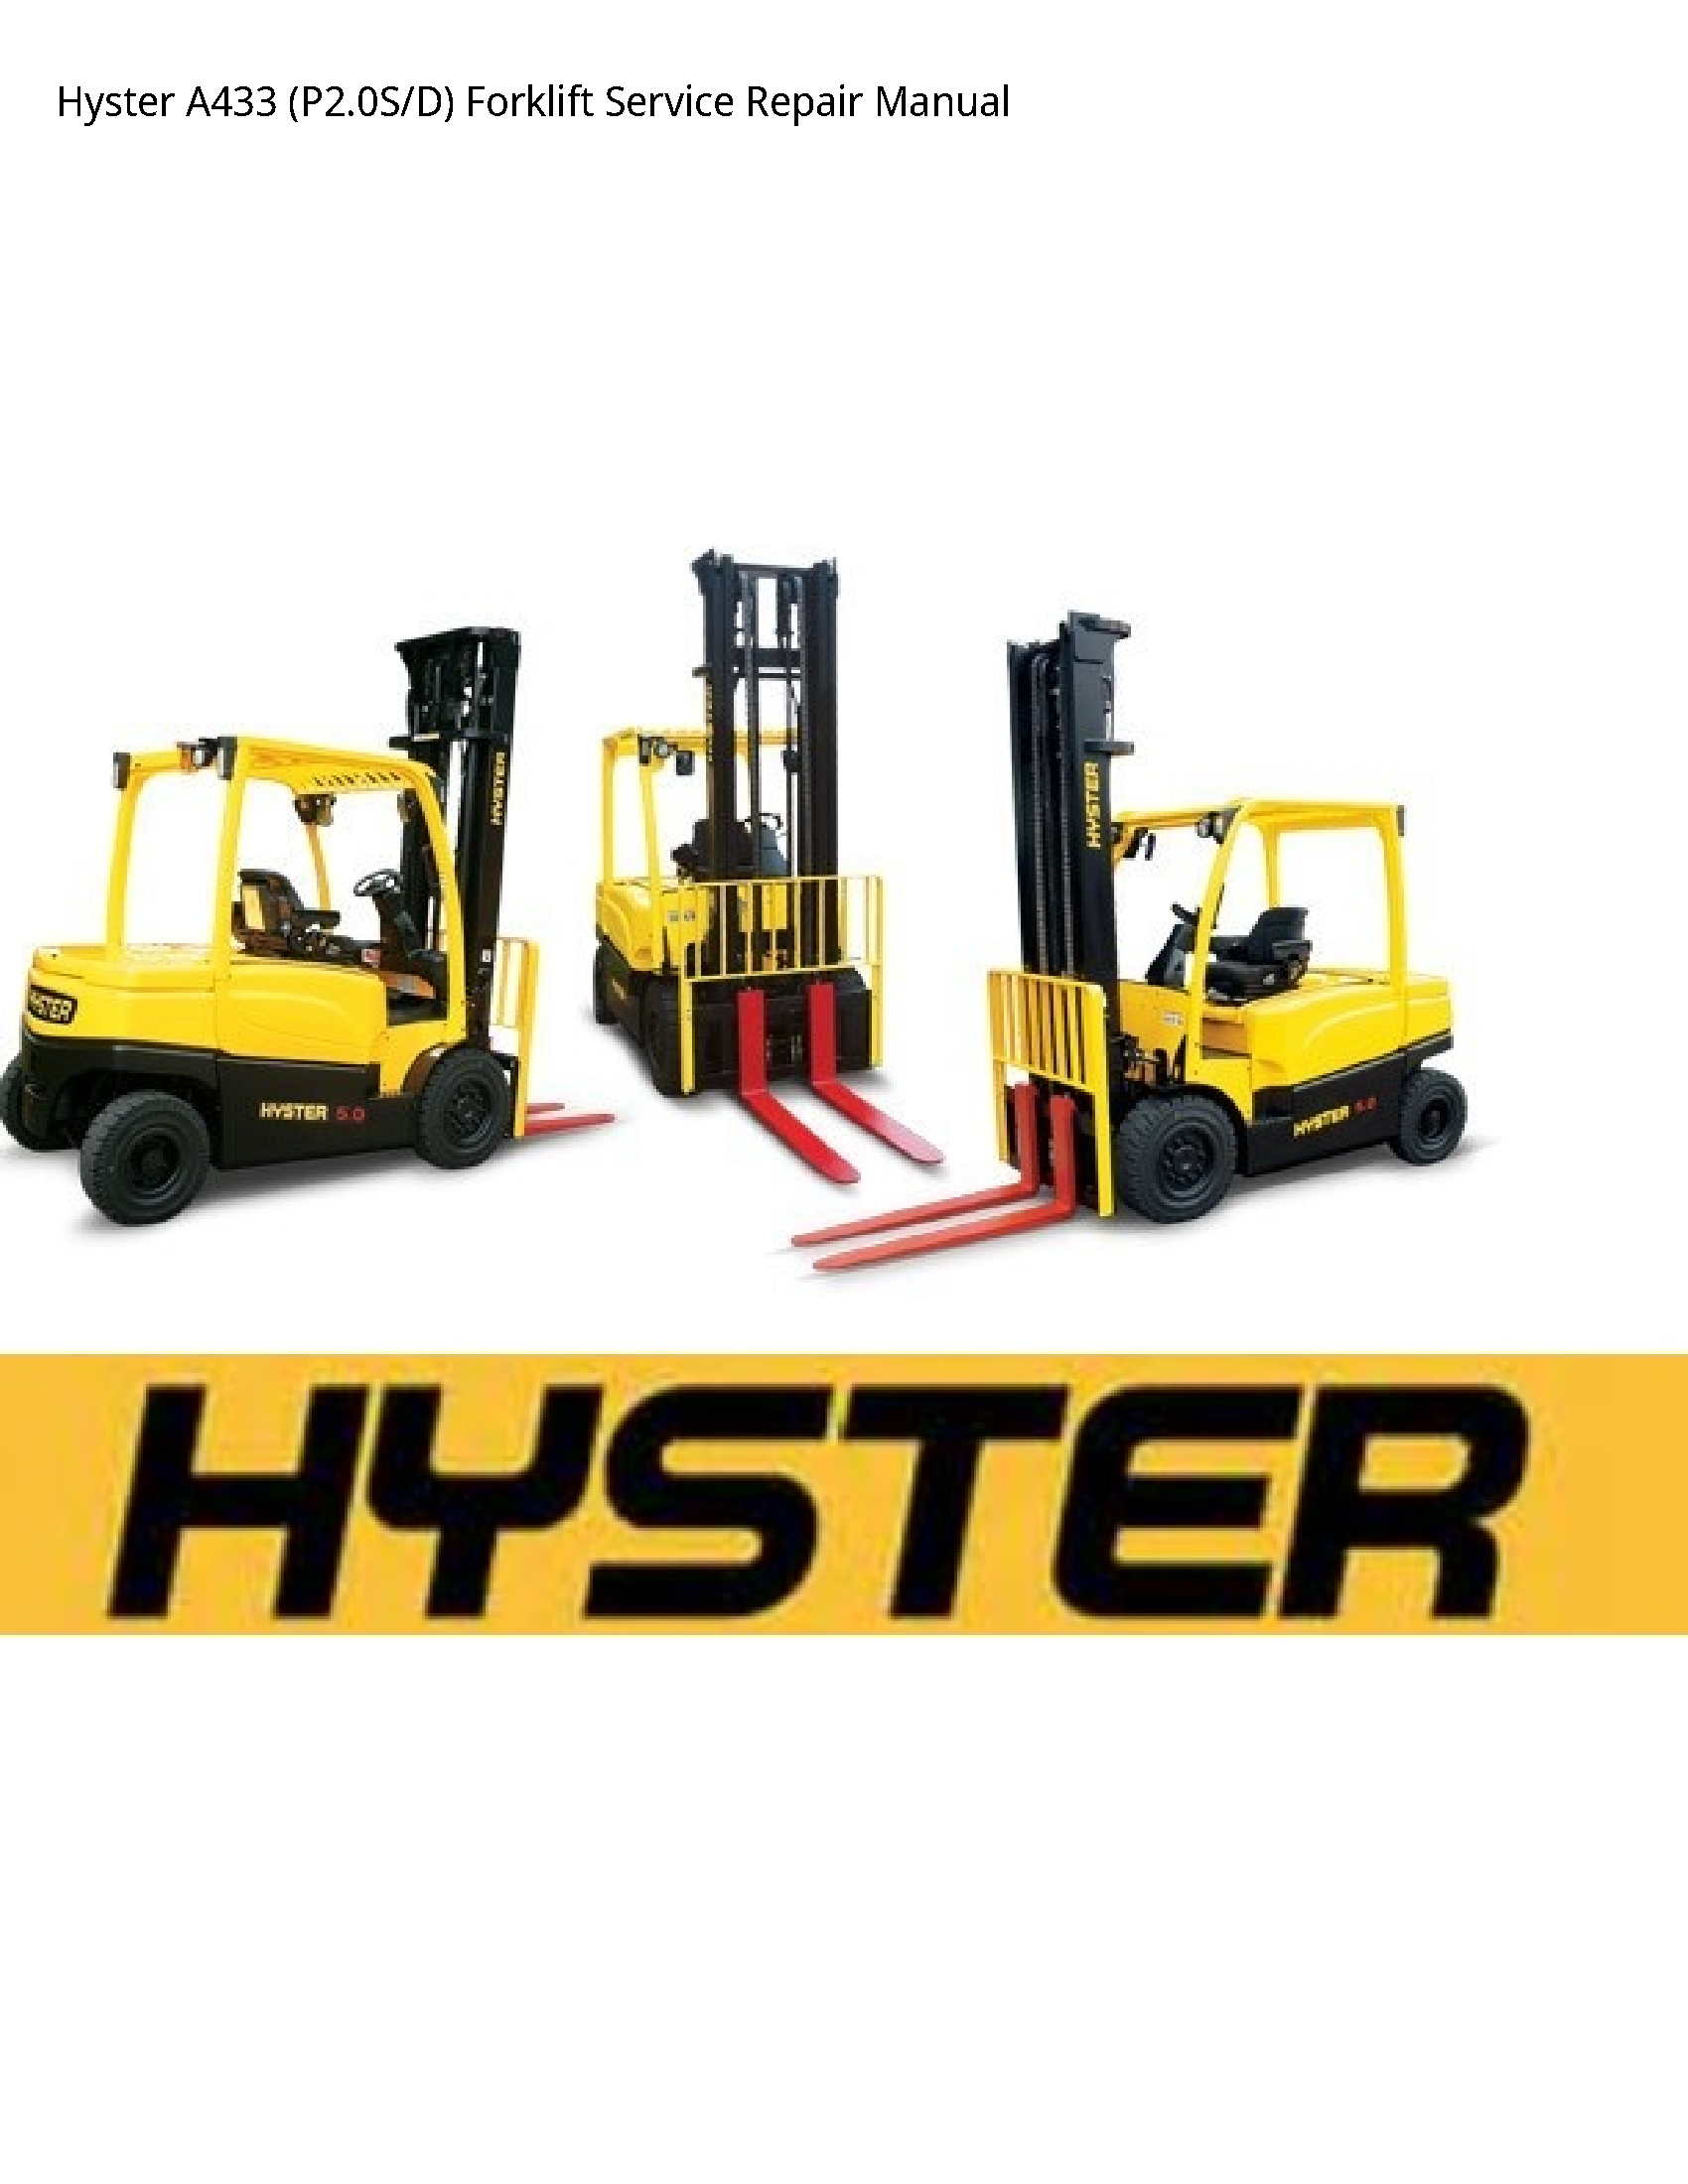 Hyster A433 Forklift manual